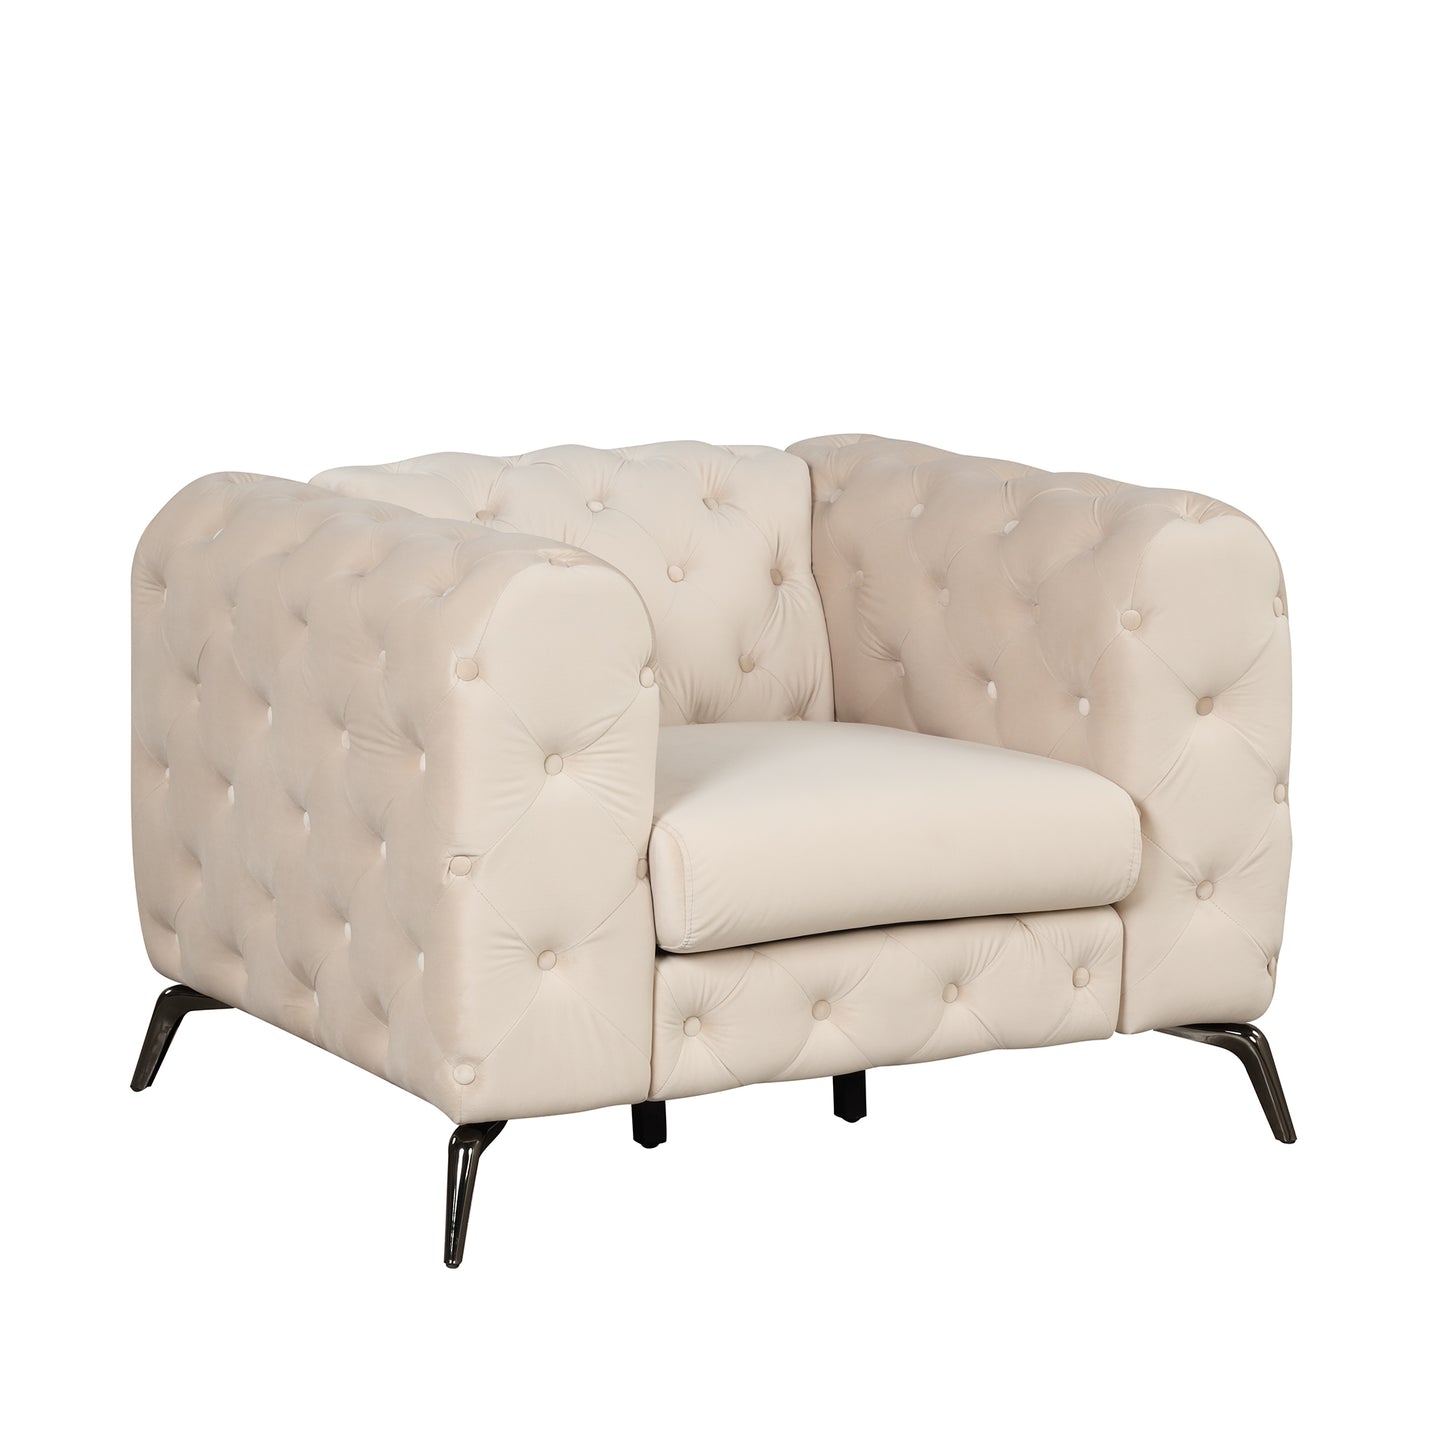 Velvet Upholstered Accent Chair with Button Tufted Back, Ideal for Living Room, Bedroom, or Small Spaces - 40.5 Inch, Beige